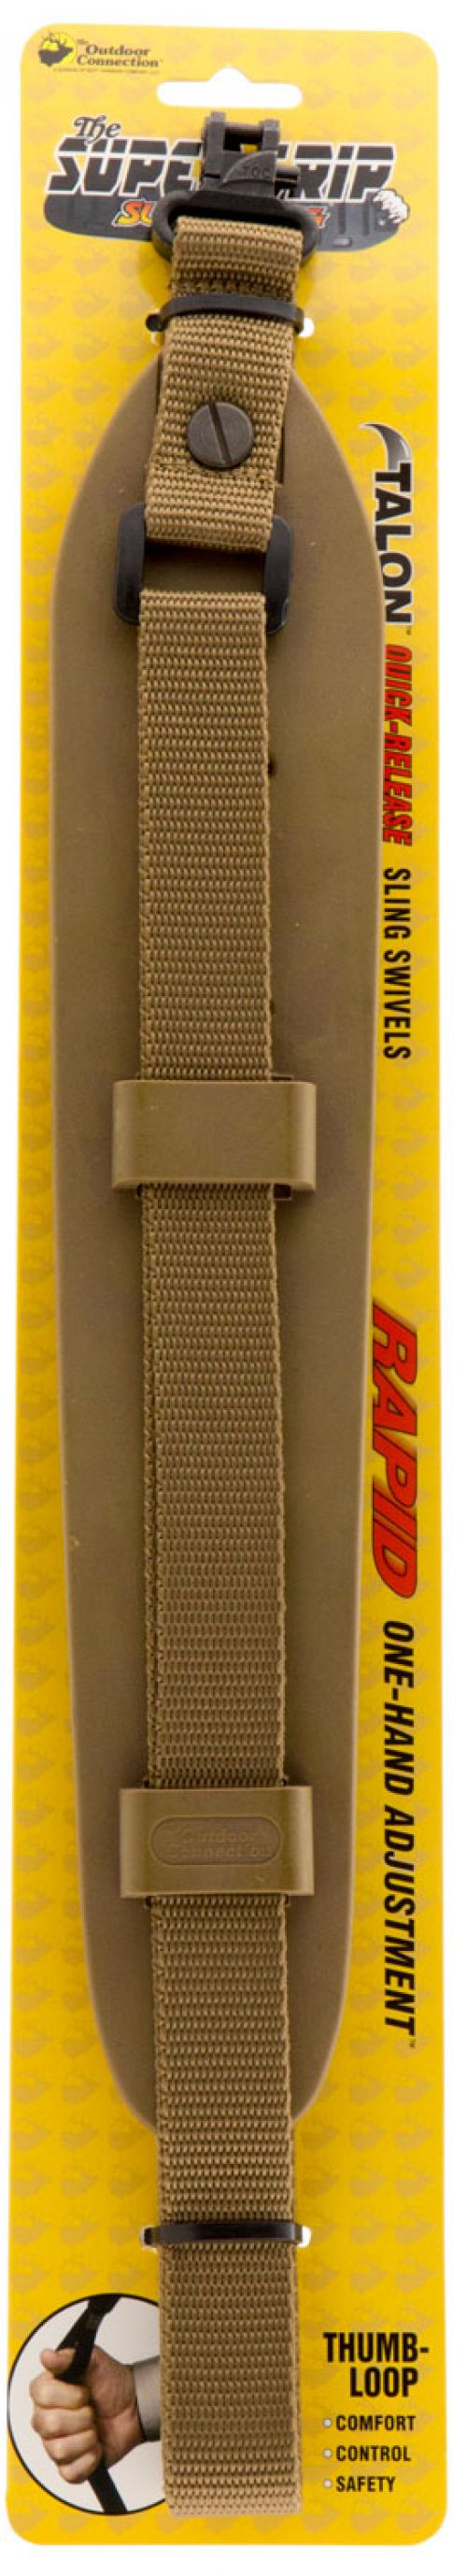 Outdoor Connection Super Grip 1 Swivel Size Coyote Tan